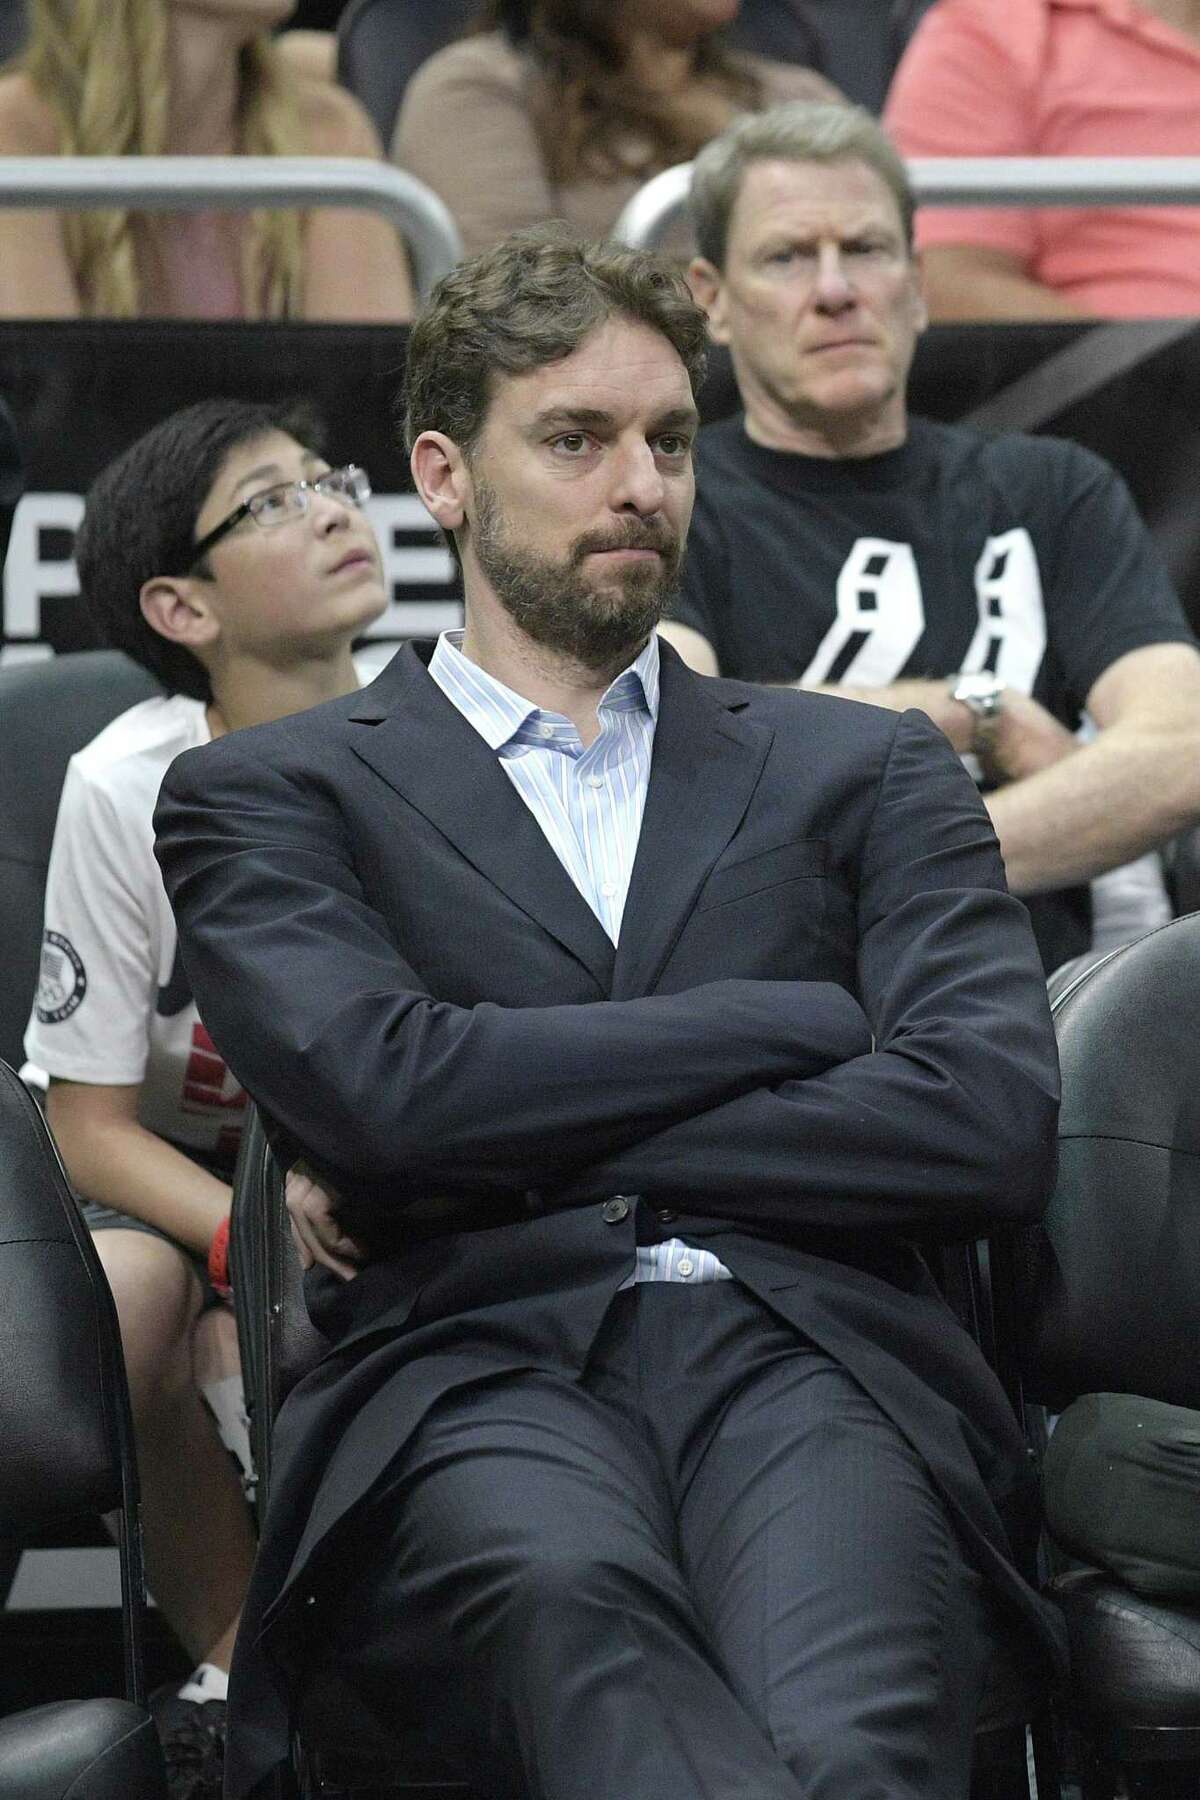 San Antonio Spurs center Pau Gasol watches from the bench during the second half of an NBA basketball game against the Orlando Magic in Orlando, Fla., Wednesday, Feb. 15, 2017. The Spurs won 107-79. (AP Photo/Phelan M. Ebenhack)